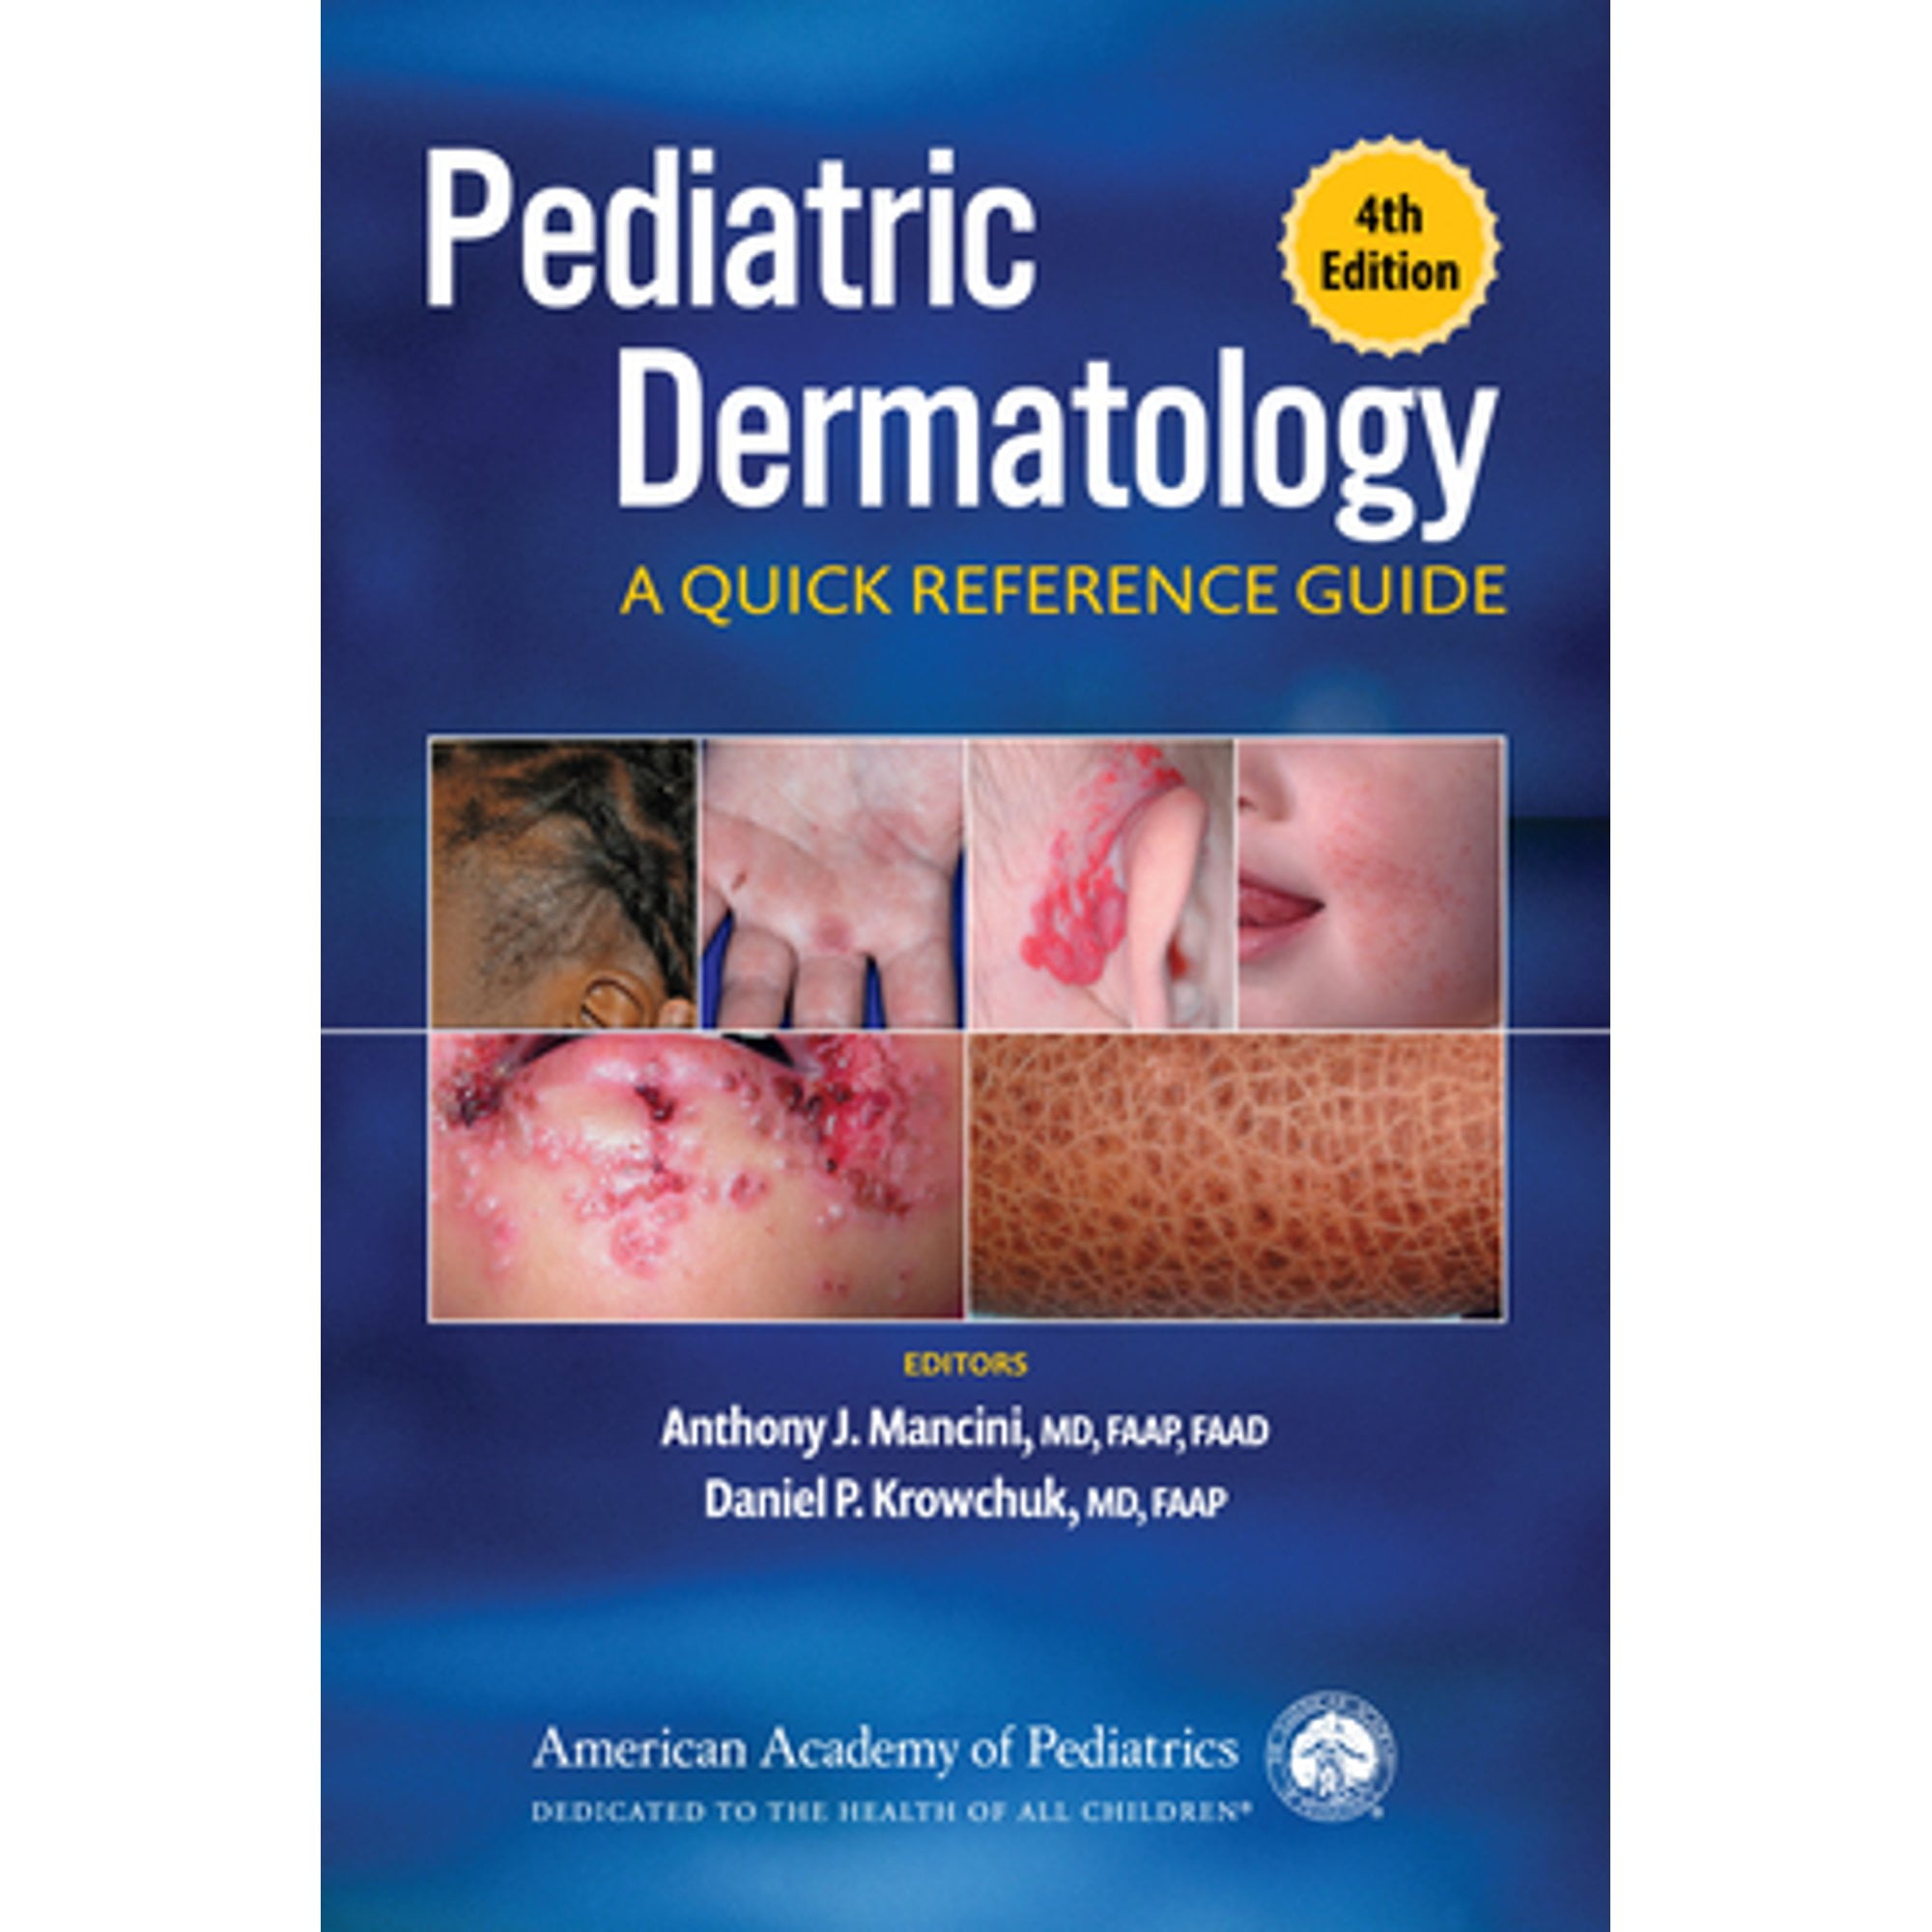 Pre-Owned Pediatric Dermatology: A Quick Reference Guide (Paperback) by Dr. Anthony J Mancini, Dr. Daniel P Krowchuk